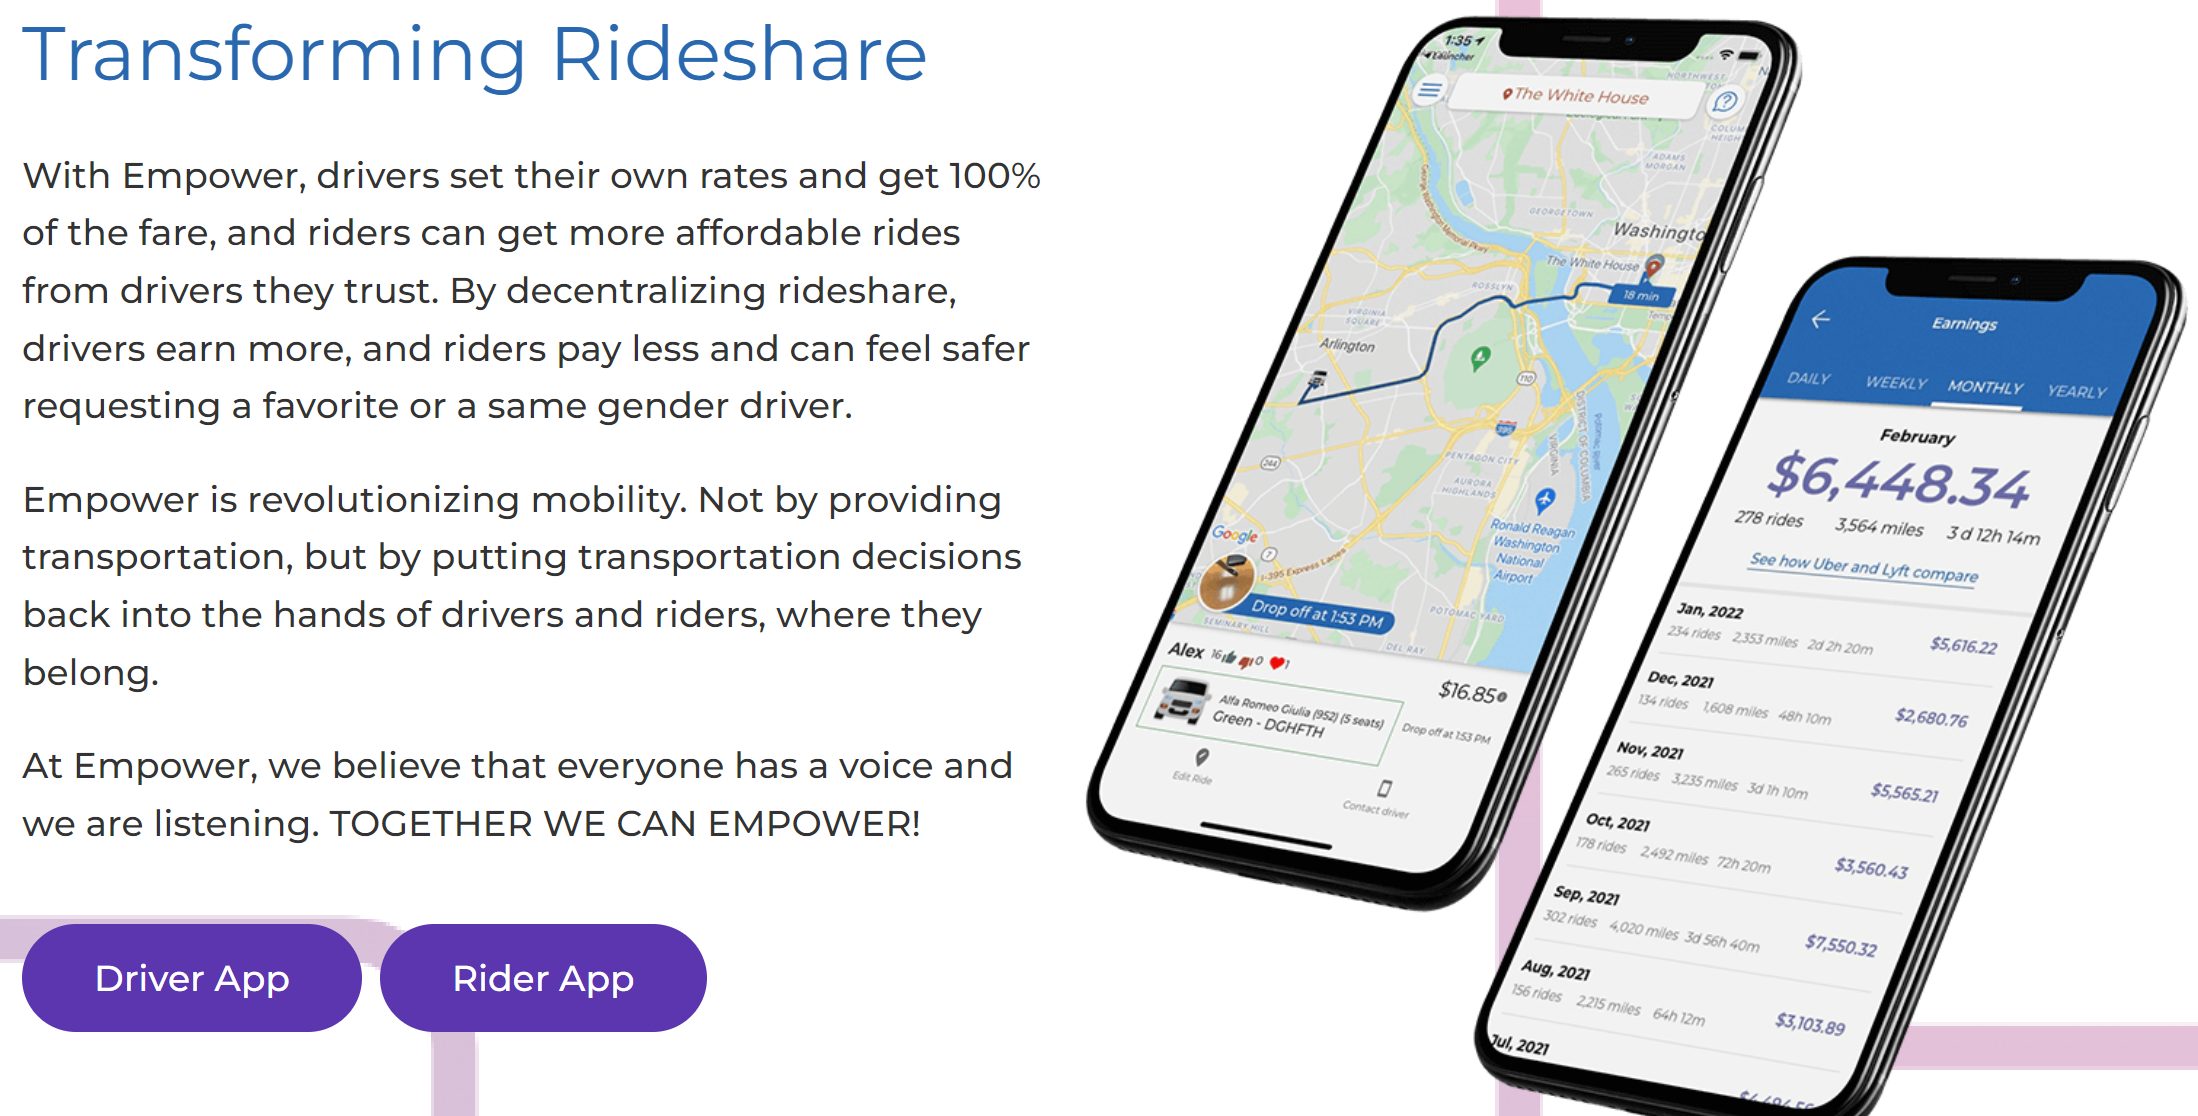 Dearborn partners with SMART Flex rideshare to offer rides for $1